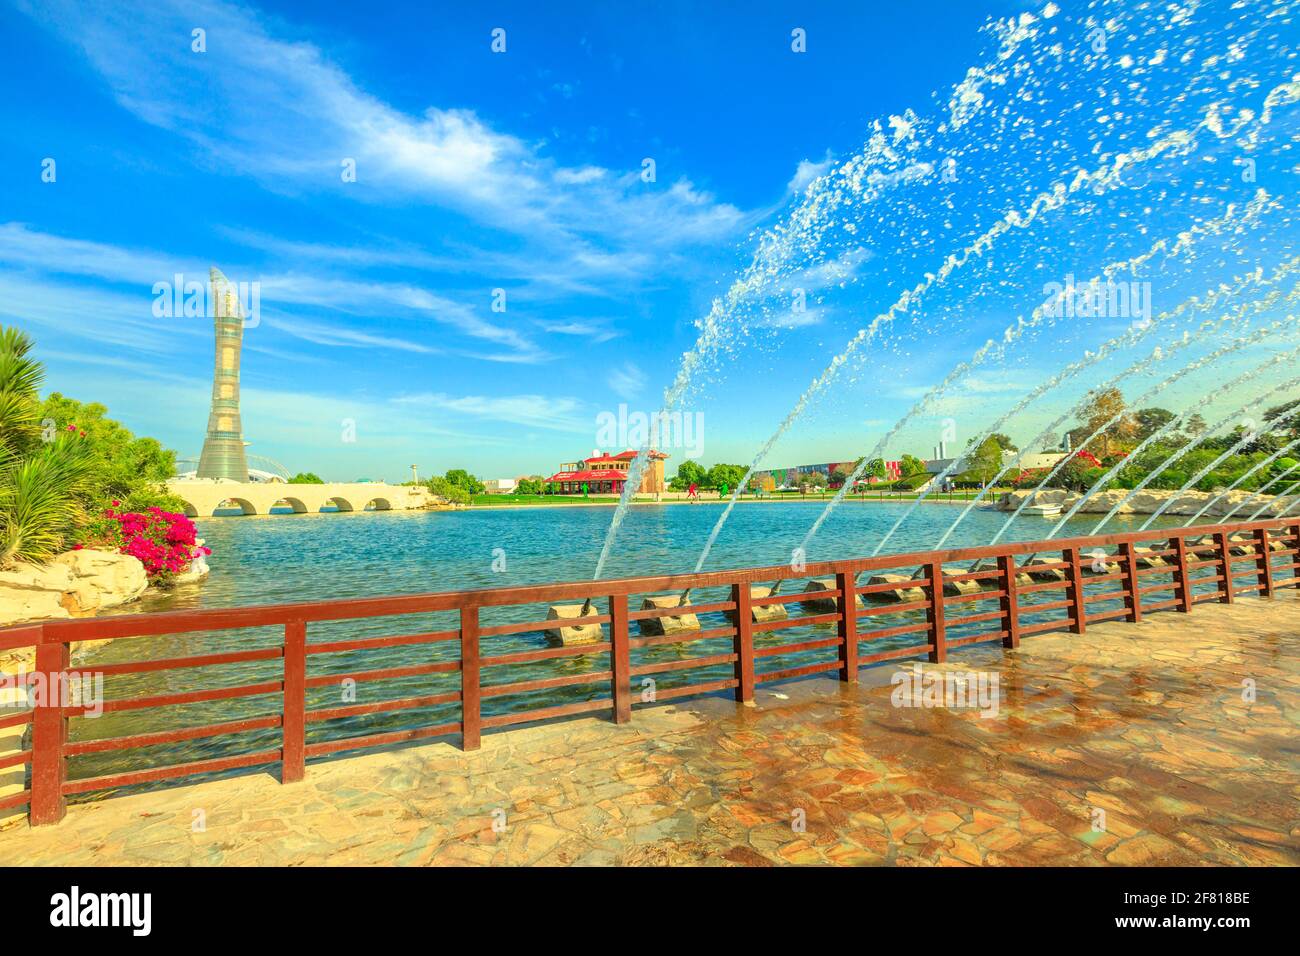 Doha, Qatar - February 21, 2019: Aspire Tower hotel and bridge with fountain in Aspire park, Doha's biggest park, located in Aspire Zone, Doha Sports Stock Photo